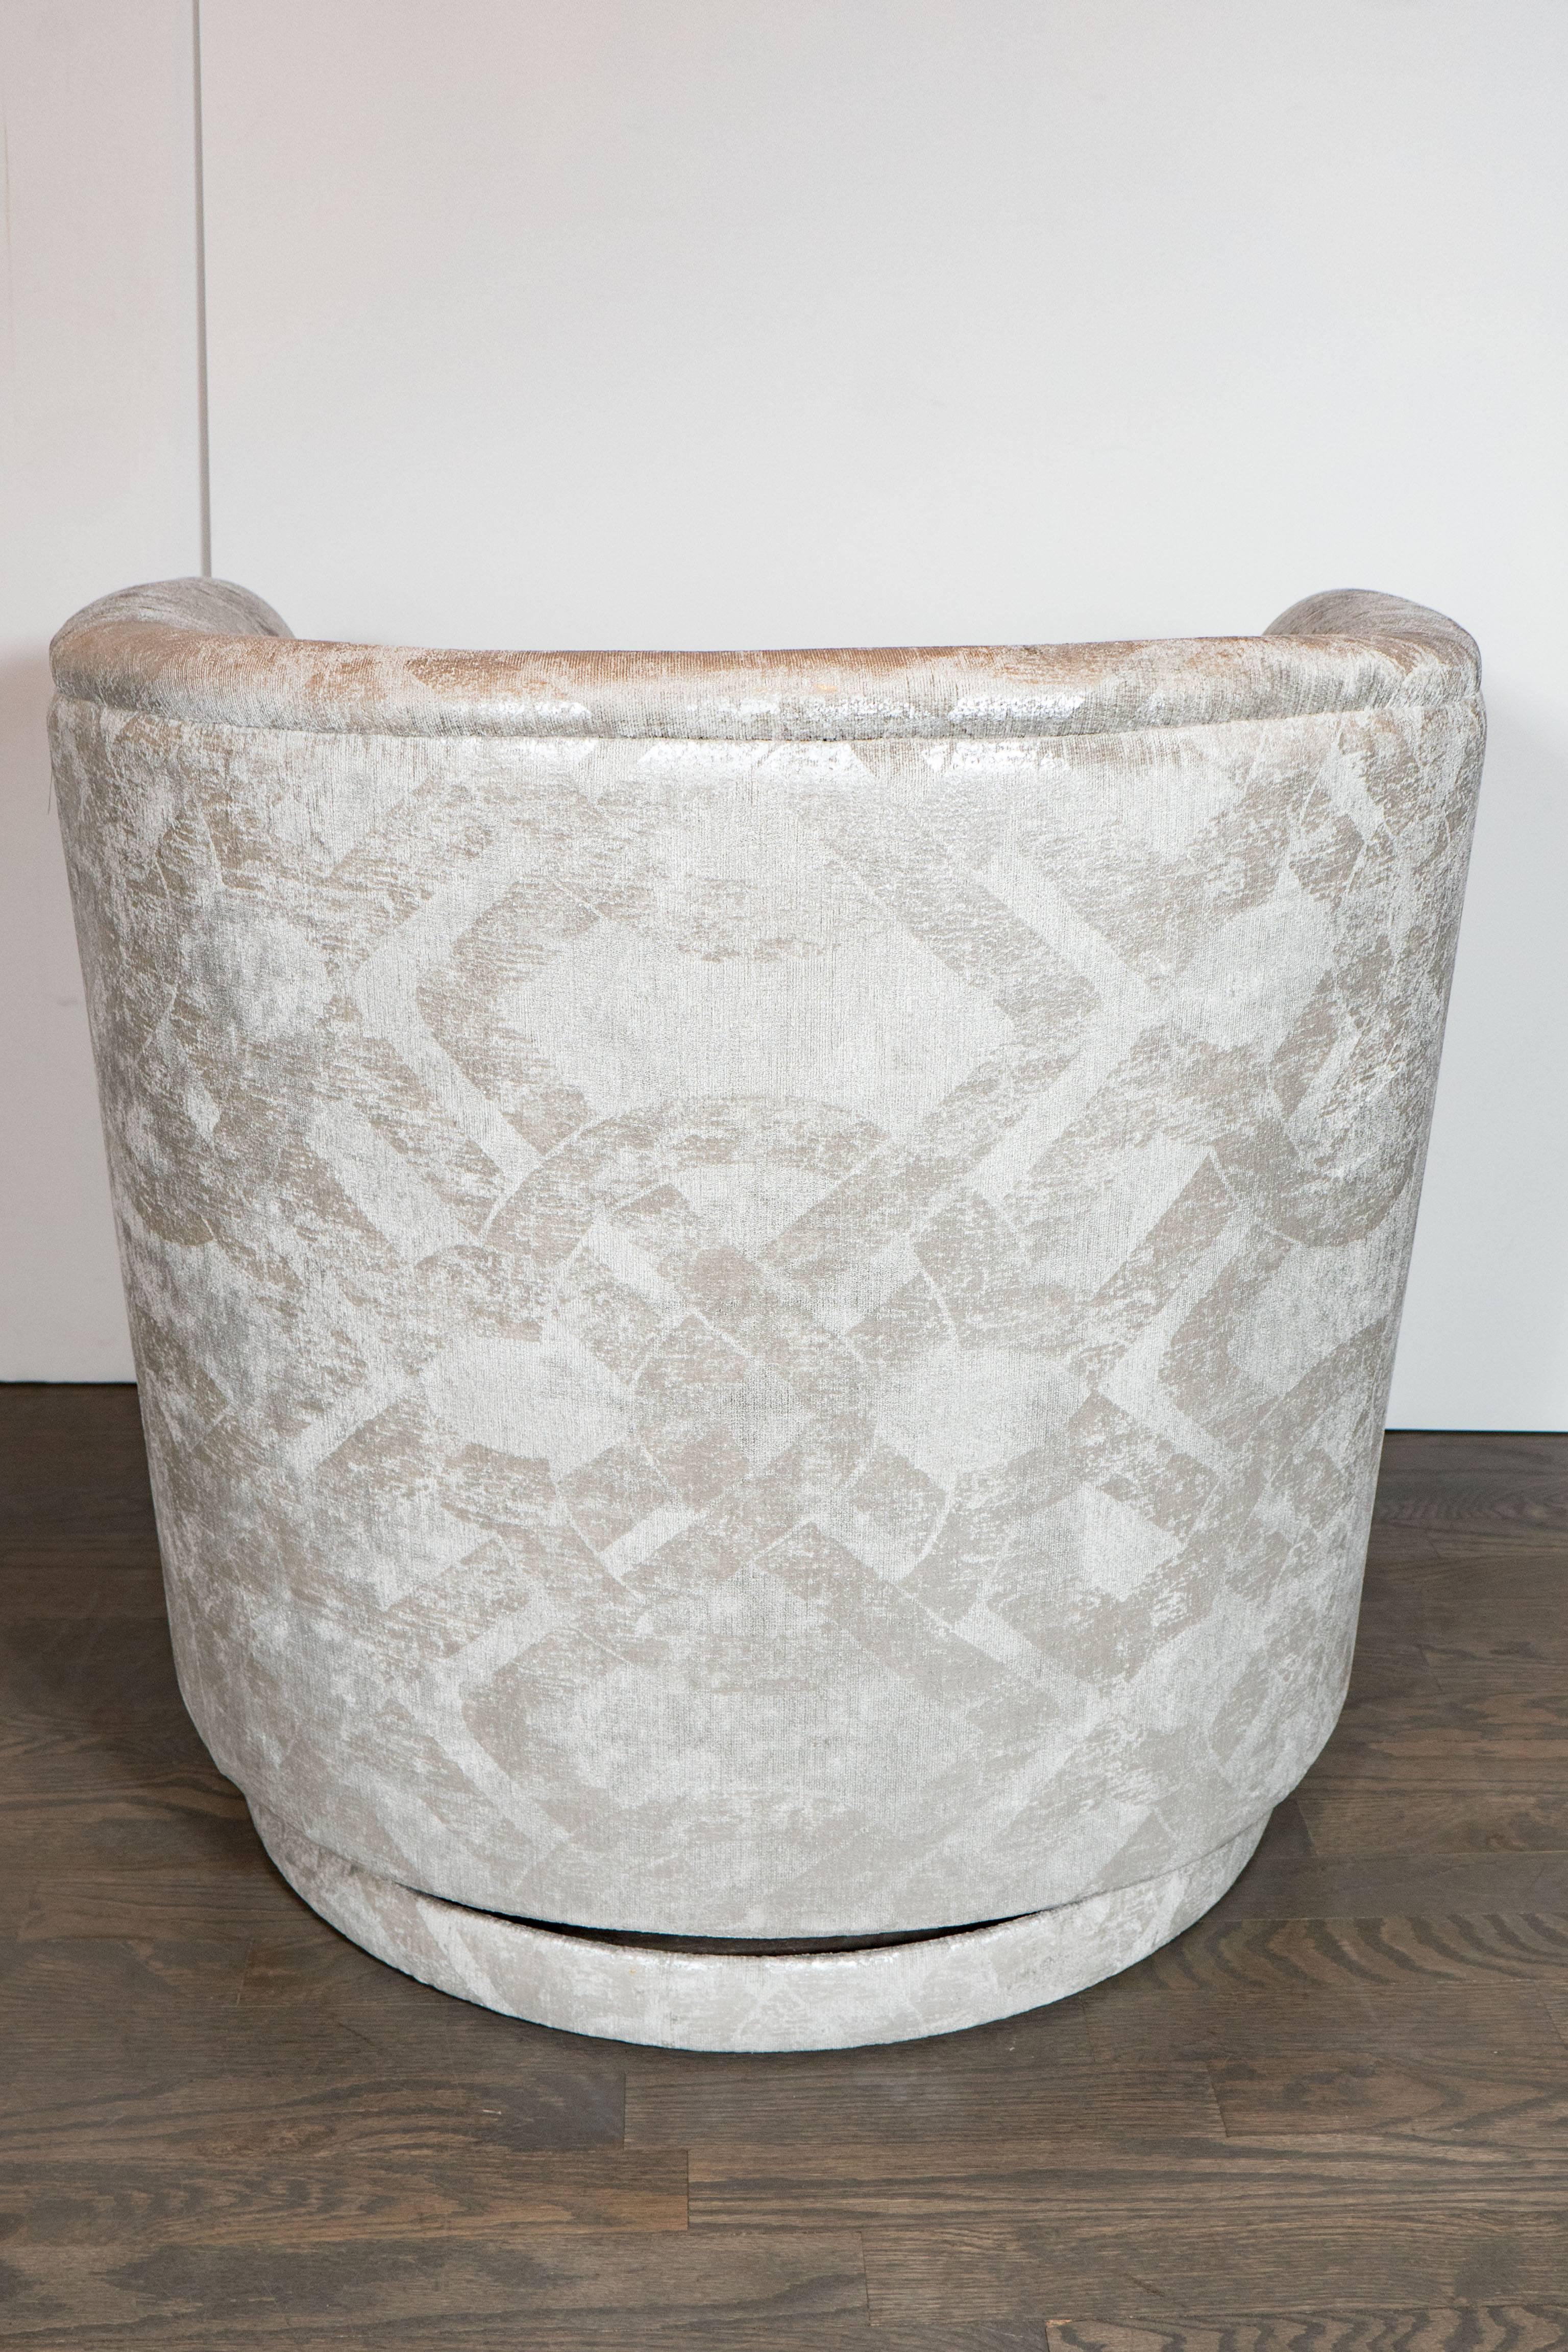 Upholstery Milo Baughman Style Swivel Chair in Embossed Pearl and Metallic Platinum Velvet For Sale